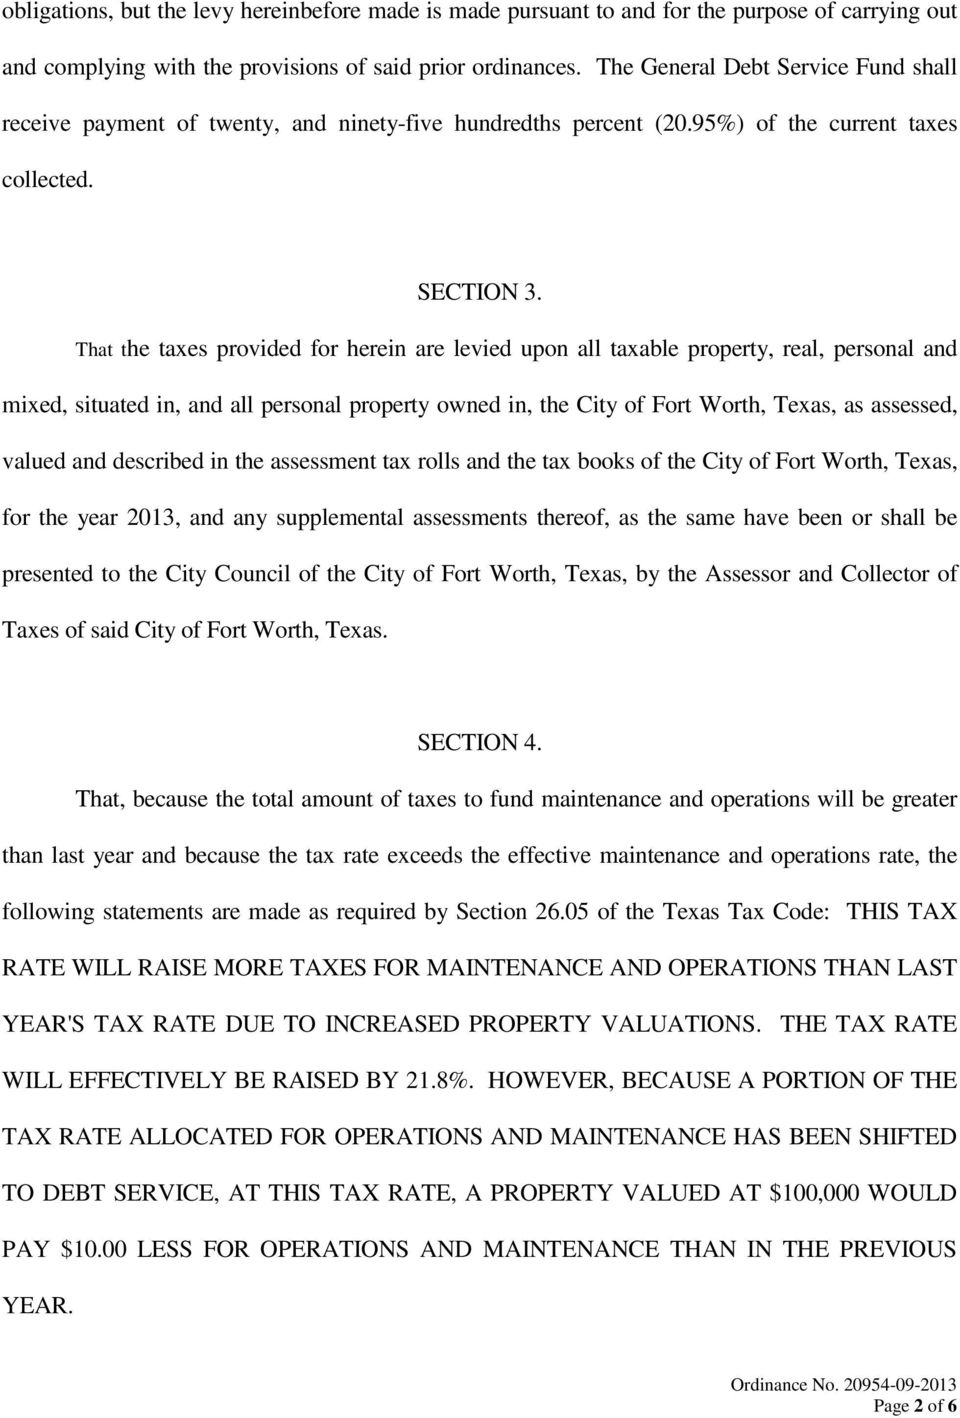 That the taxes provided for herein are levied upon all taxable property, real, personal and mixed, situated in, and all personal property owned in, the City of Fort Worth, Texas, as assessed, valued